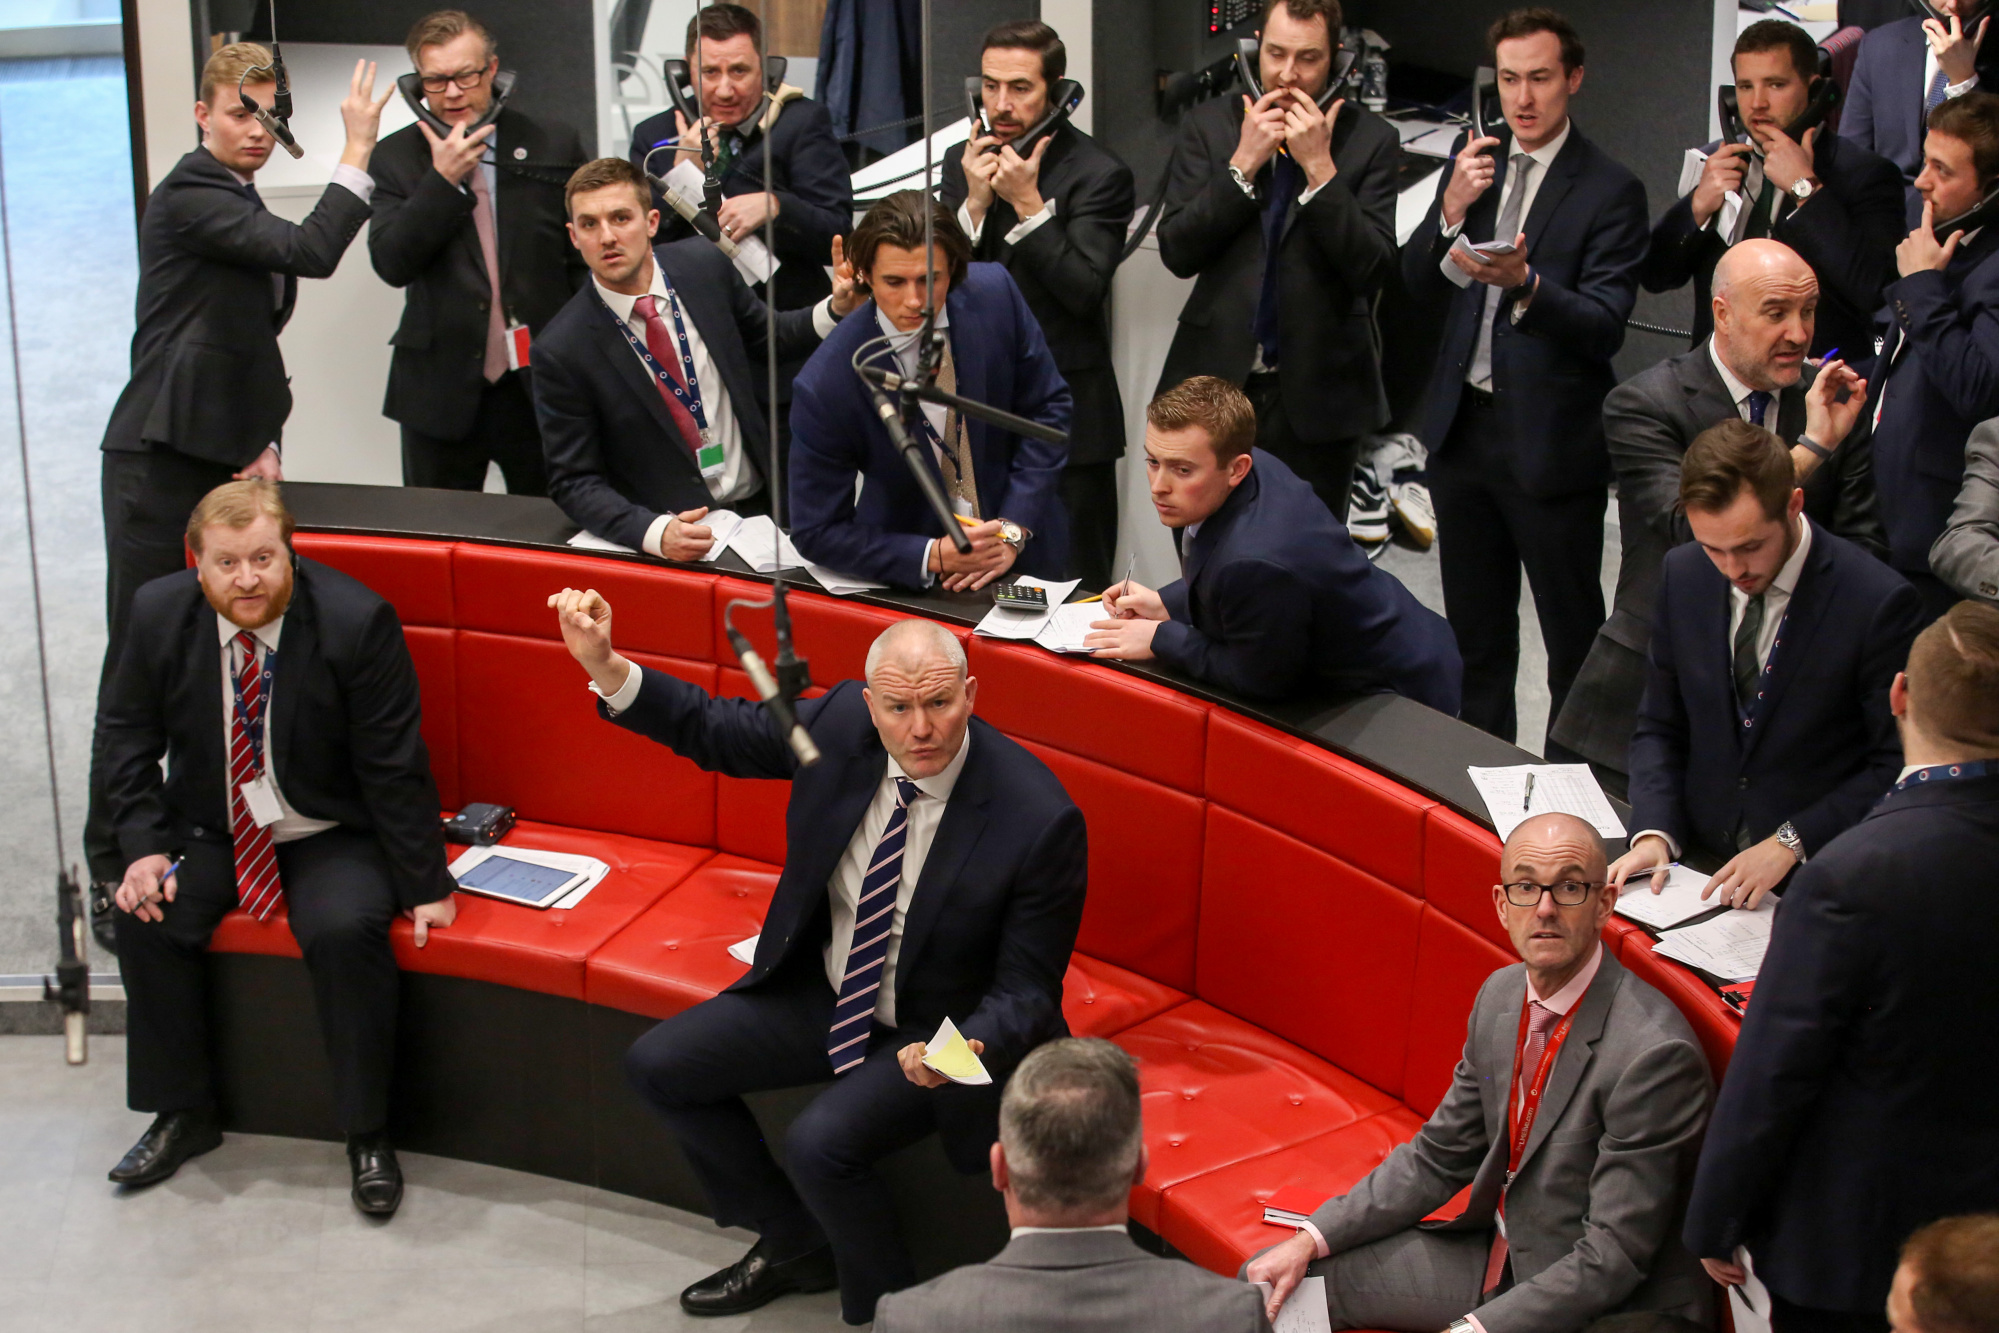 Traders react on the trading floor of the open outcry pit at the London Metal Exchange .